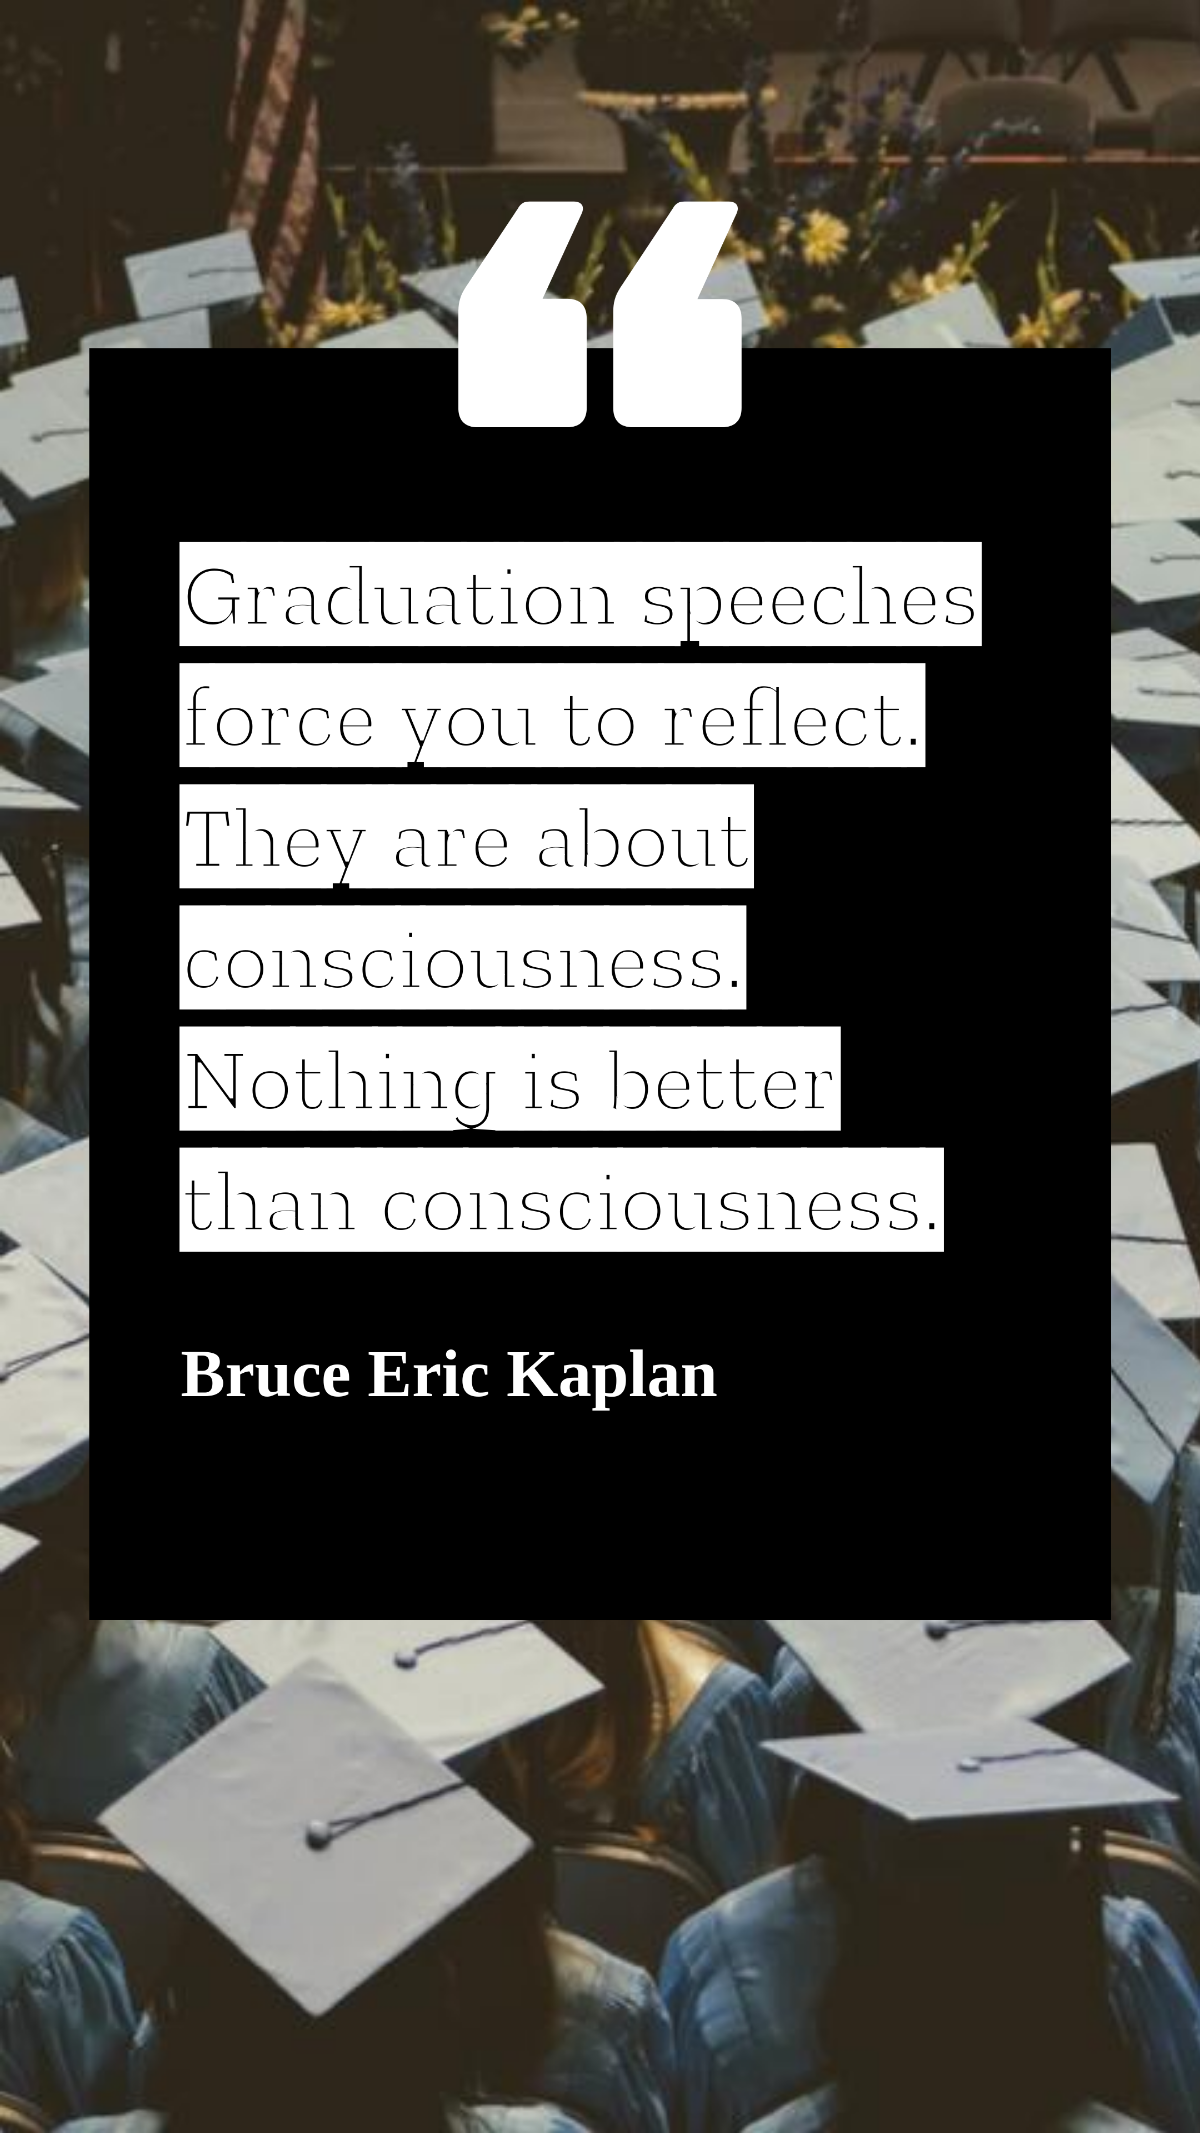 Bruce Eric Kaplan - Graduation speeches force you to reflect. They are about consciousness. Nothing is better than consciousness.